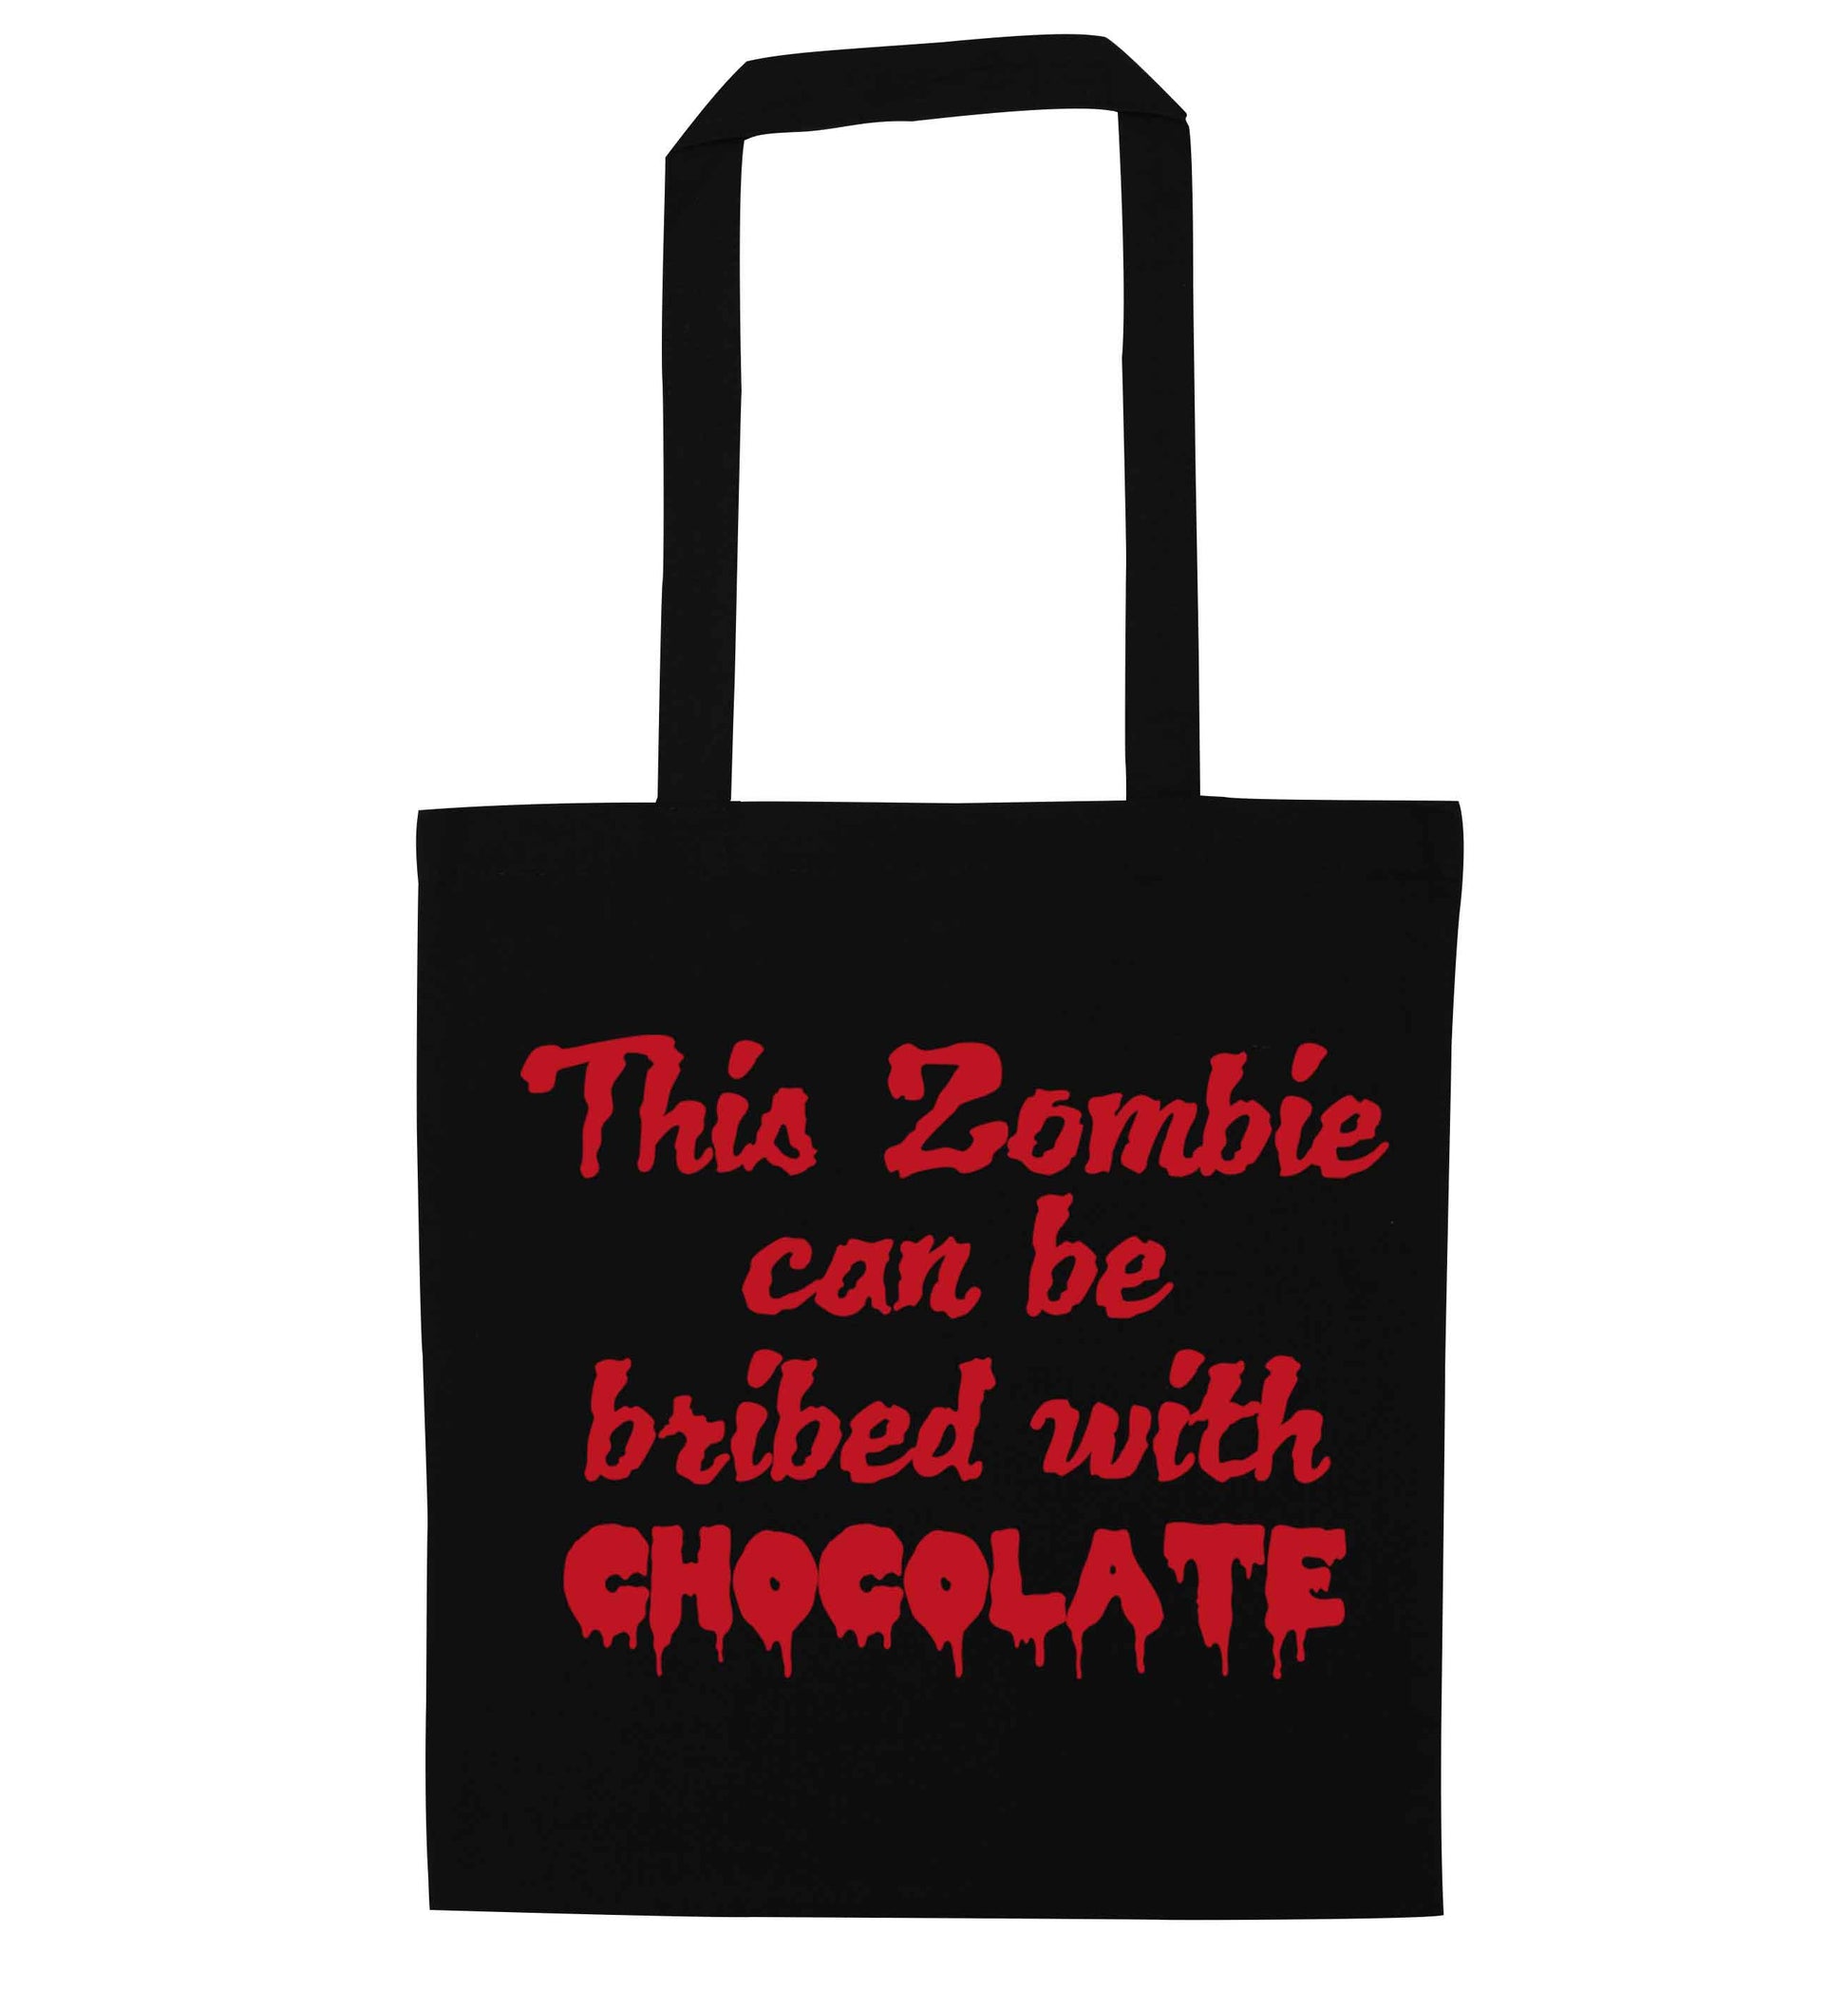 This zombie can be bribed with chocolate black tote bag